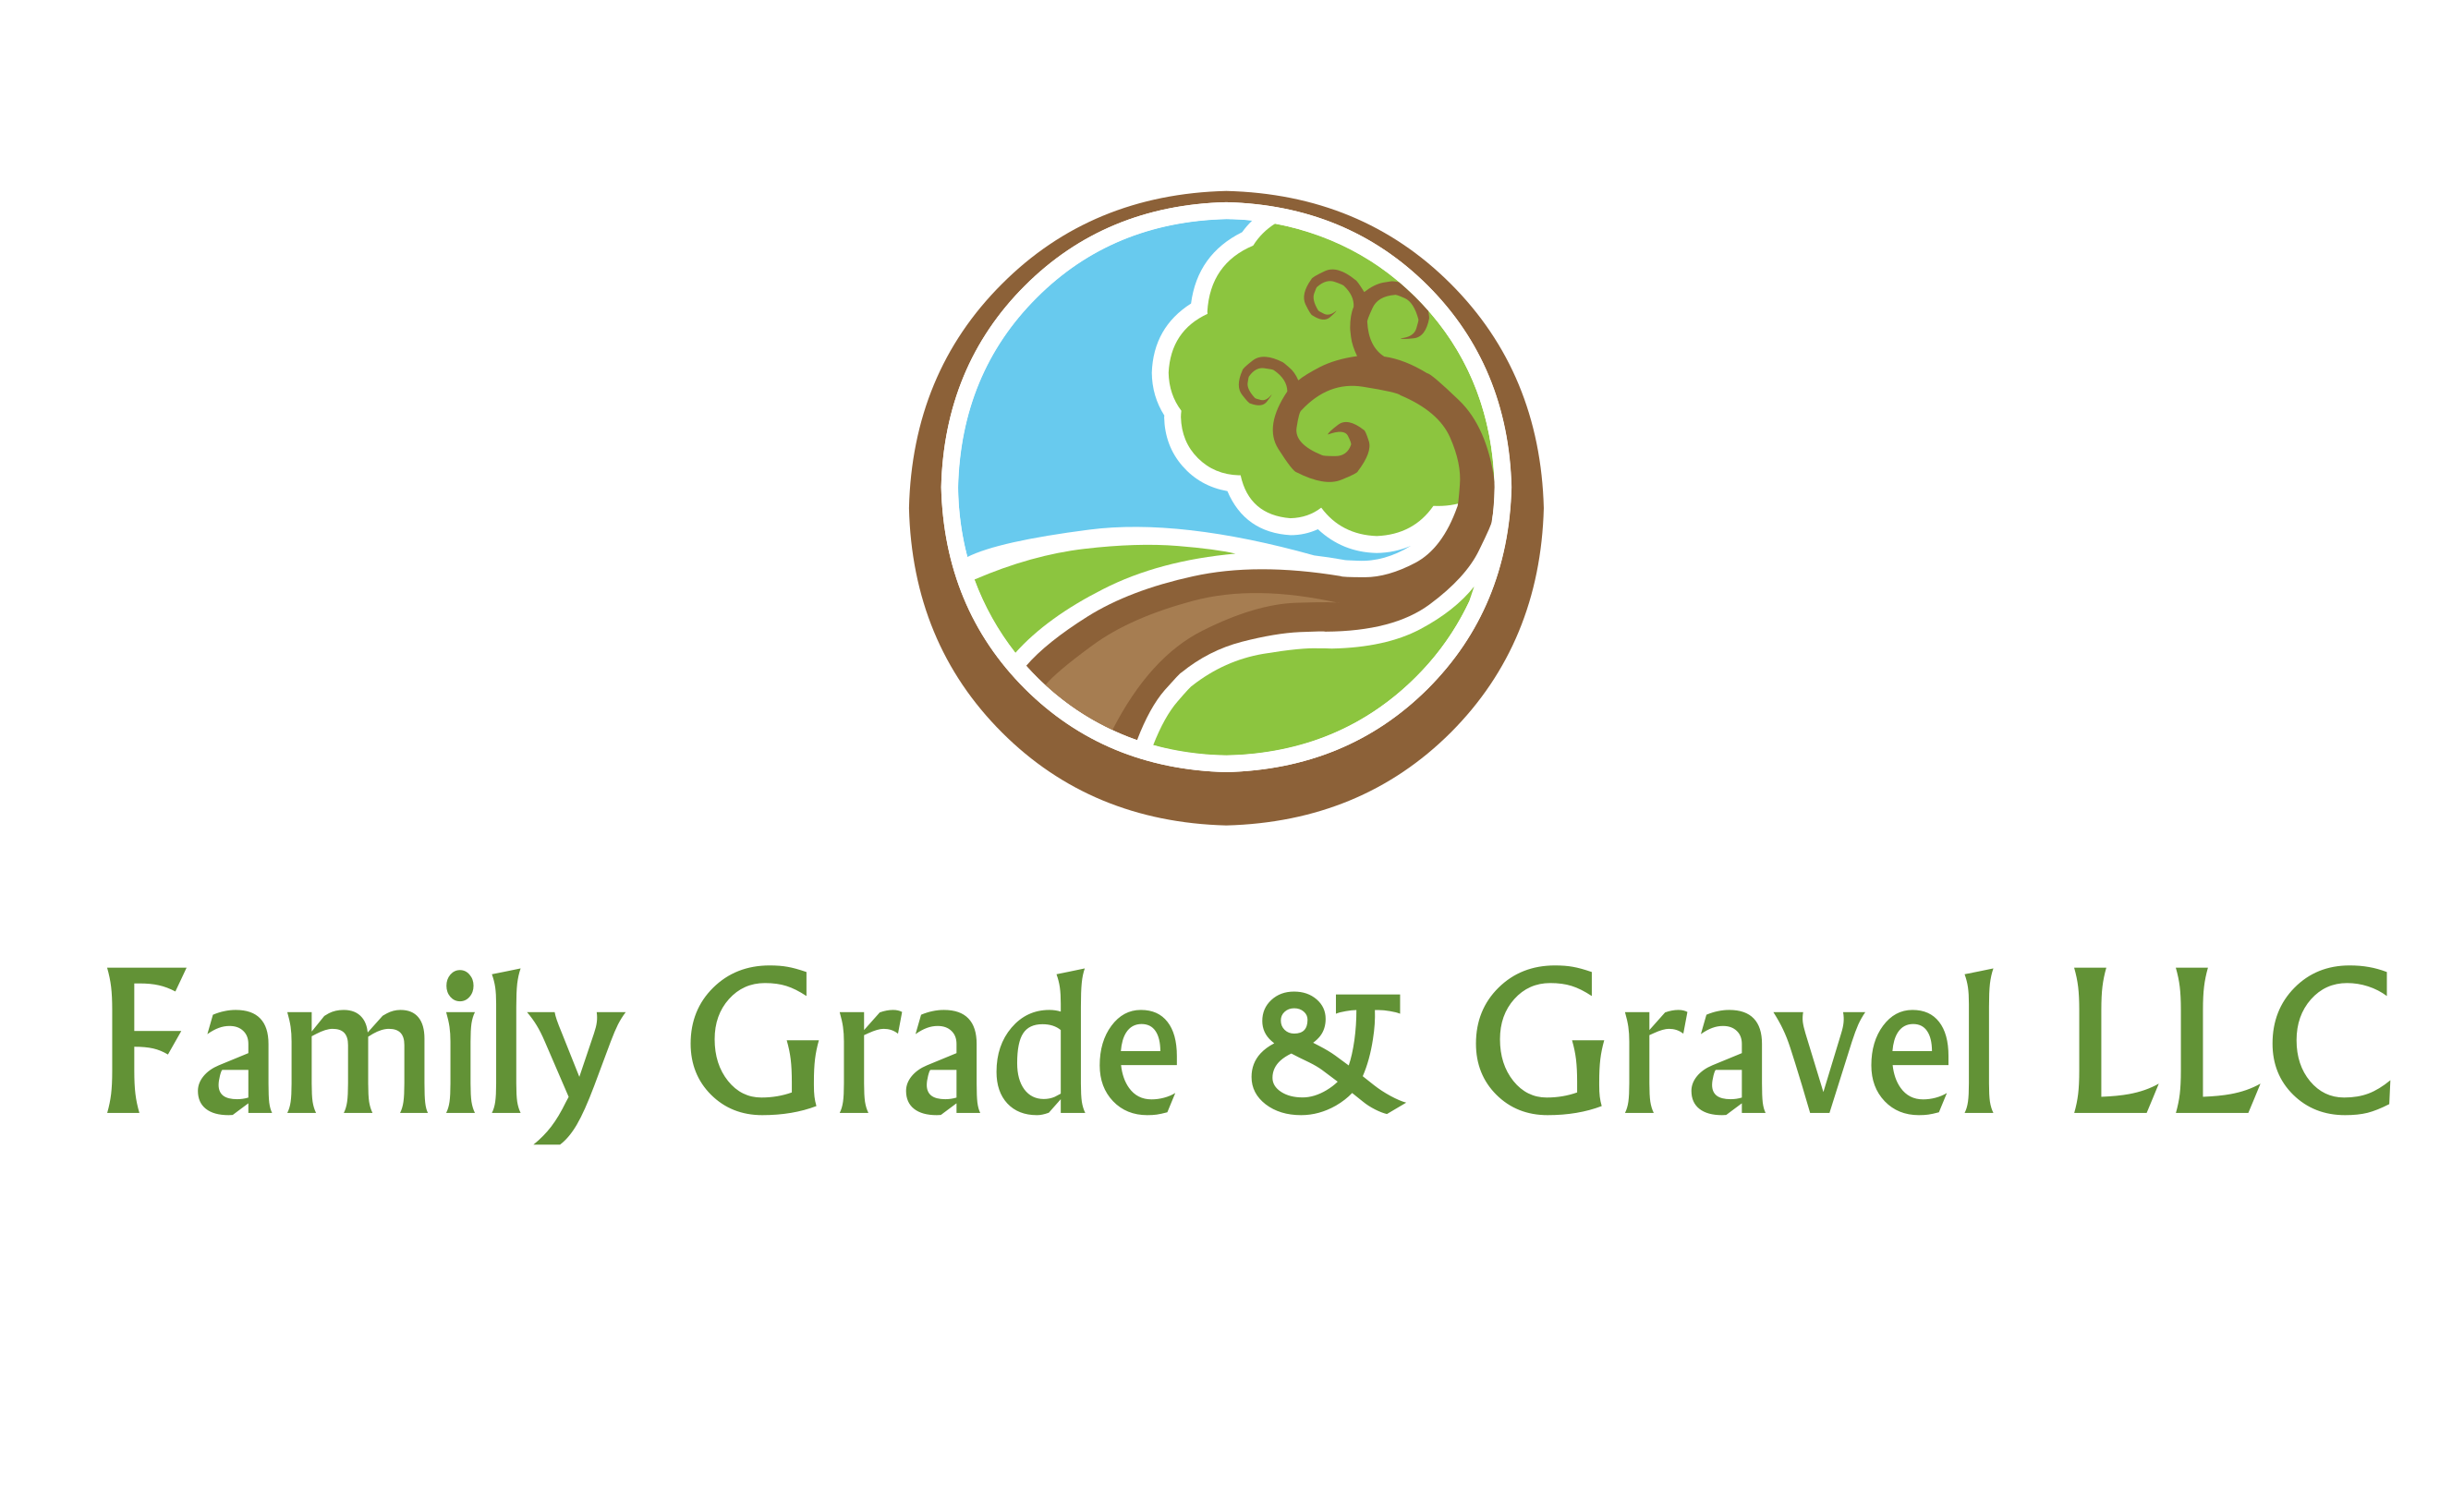 Family Grade & Gravel serving East Lansing and surrounding areas